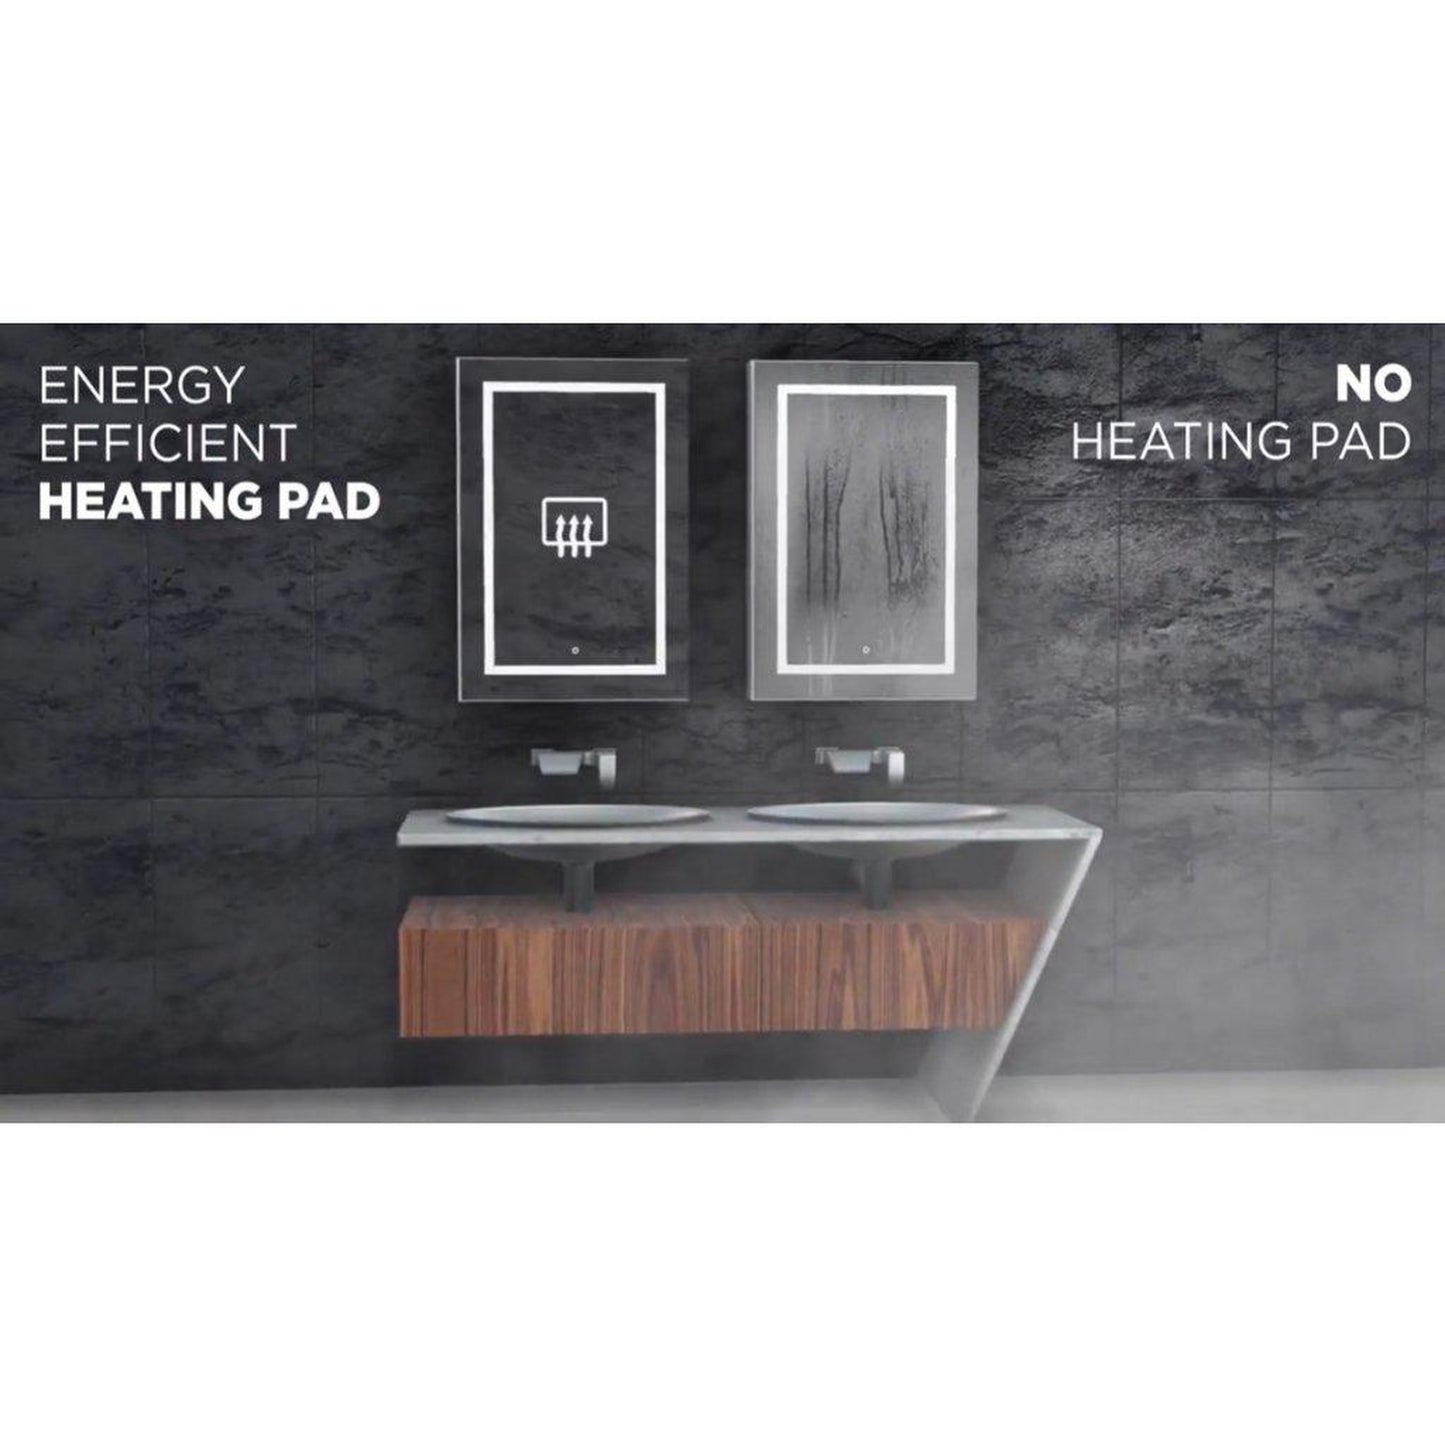 Krugg Reflections Sol 27" x 27" 5000K Round Wall-Mounted Illuminated Silver Backed LED Mirror With Built-in Defogger and Touch Sensor On/Off Built-in Dimmer